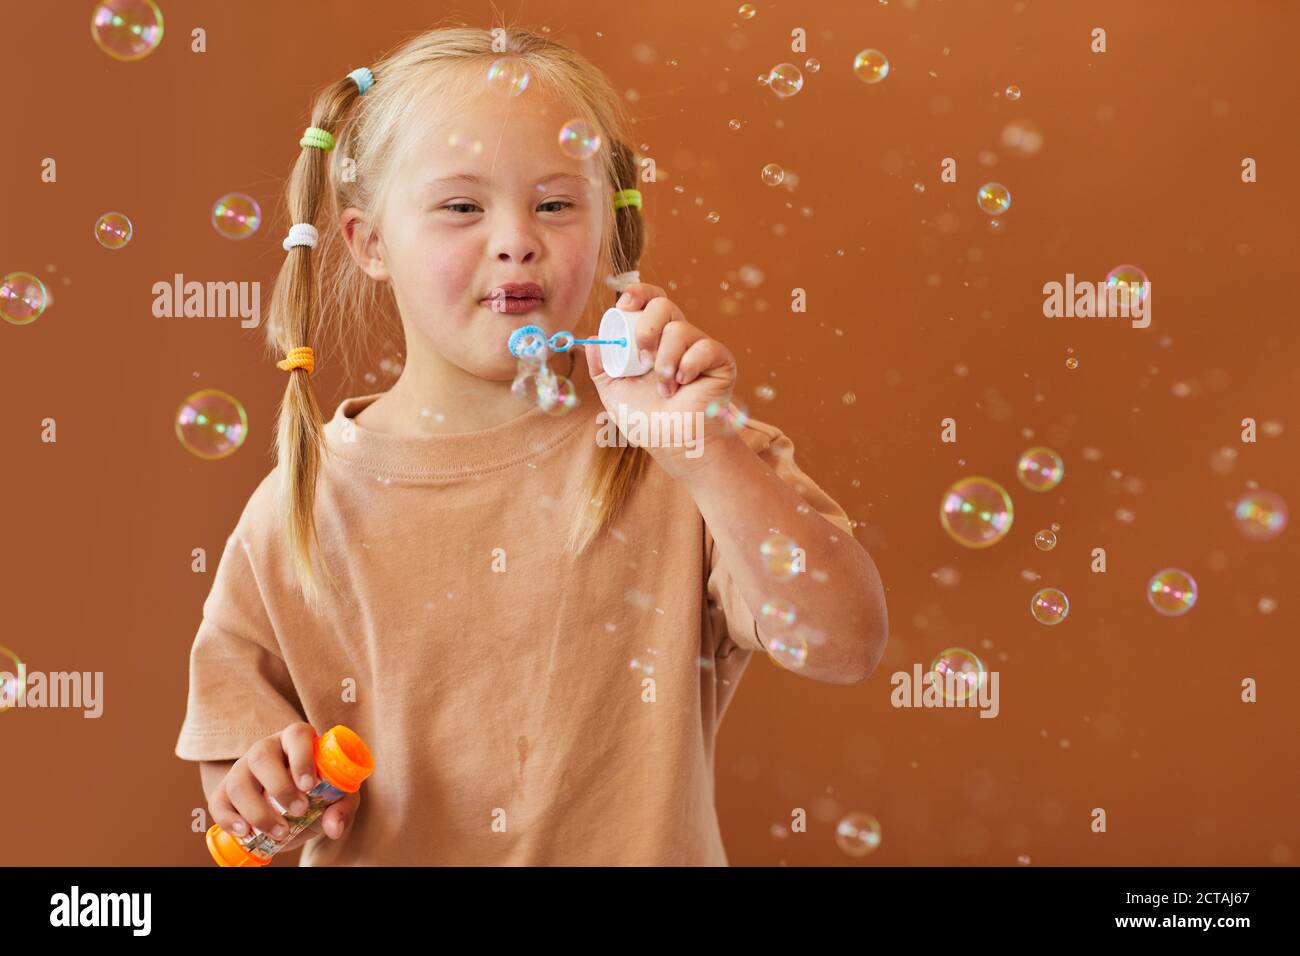 Waist up portrait of cute girl with down syndrome blowing bubbles while posing against brown background in studio, copy space Stock Photo